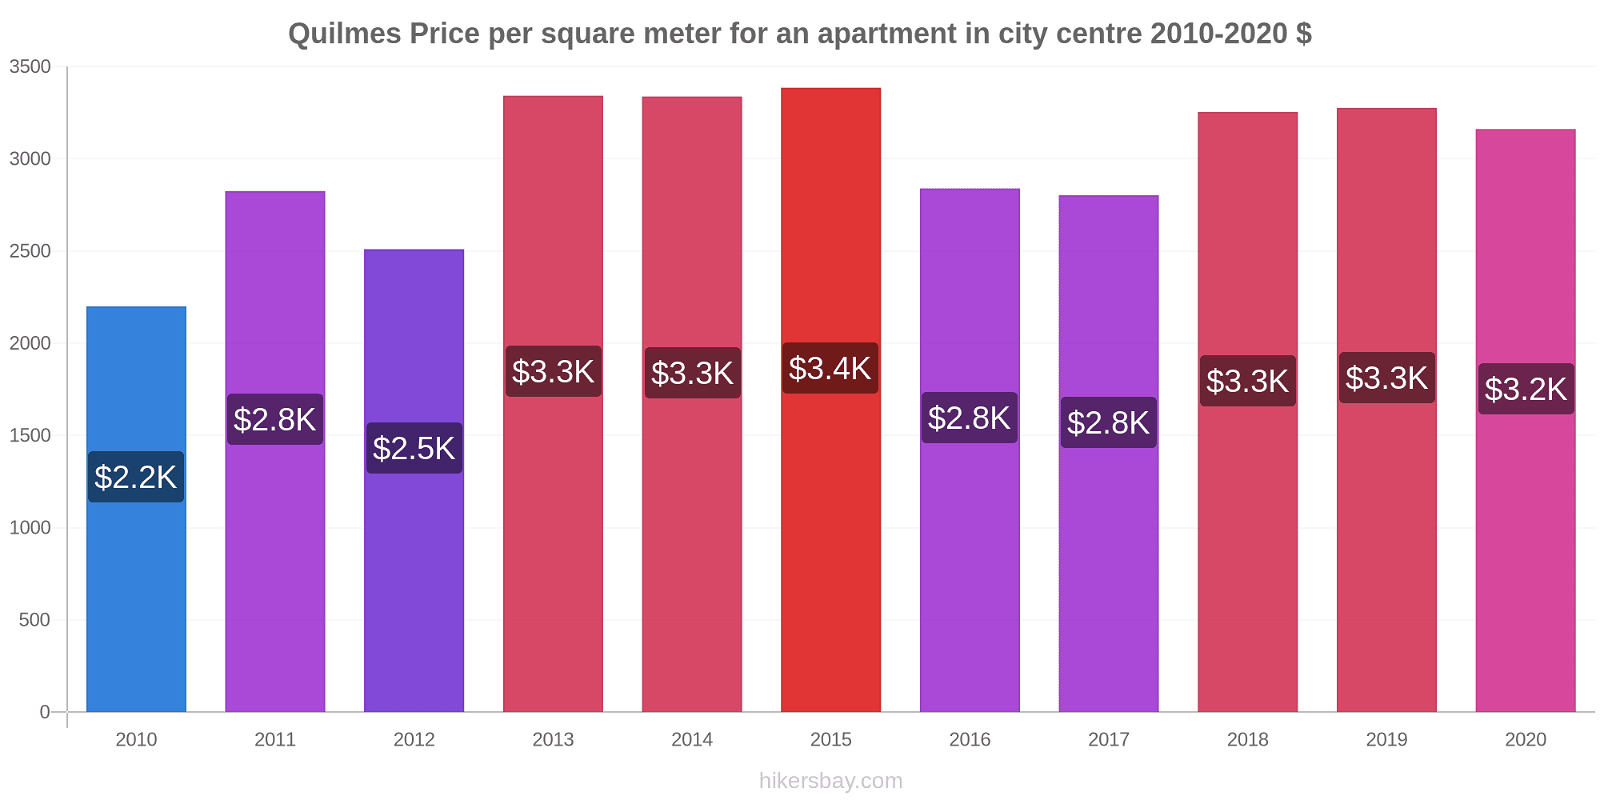 Quilmes price changes Price per square meter for an apartment in city centre hikersbay.com